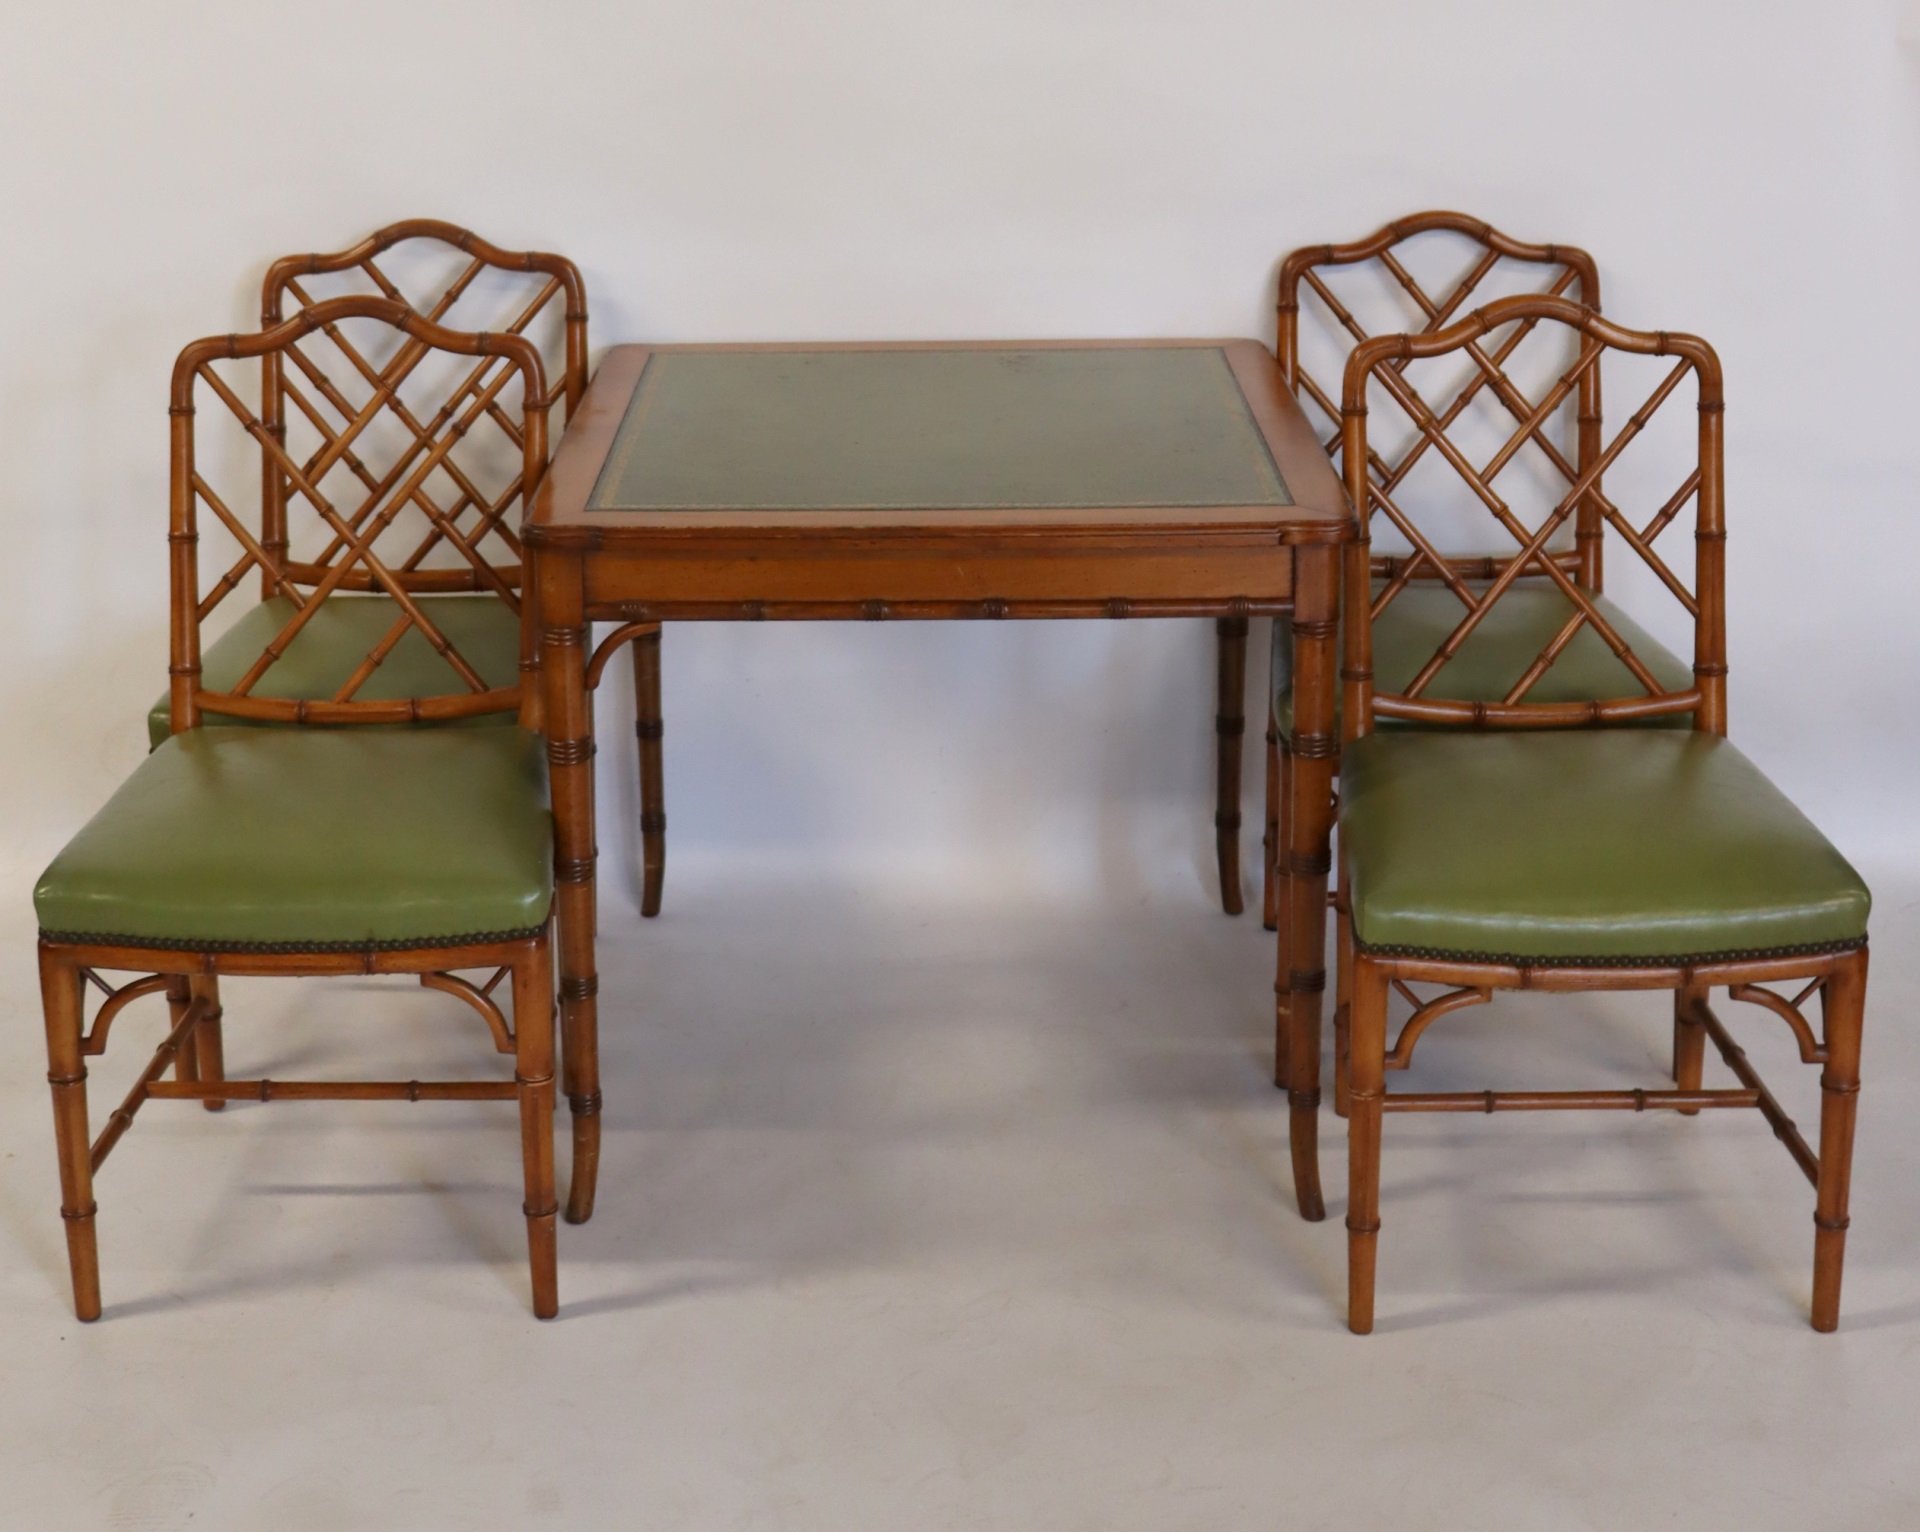 MIDCENTURY BAMBOO FORM CARD TABLE 3bd3aa